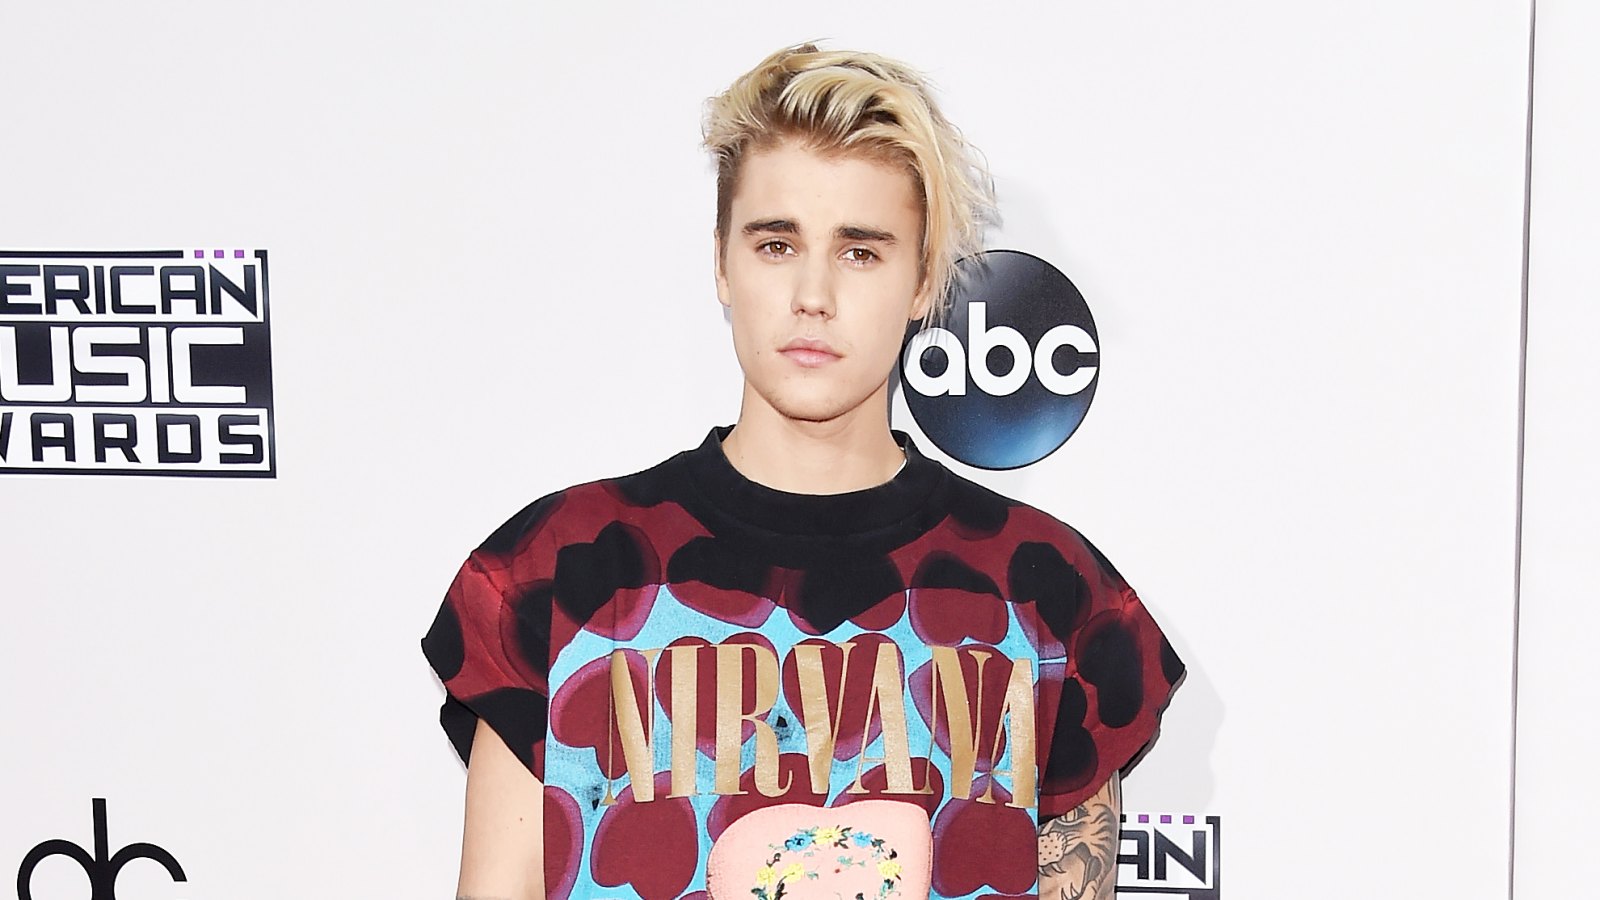 Downtown luft Foragt Nirvana Fans Mad Justin Bieber Wore Band Shirt at 2015 AMAs